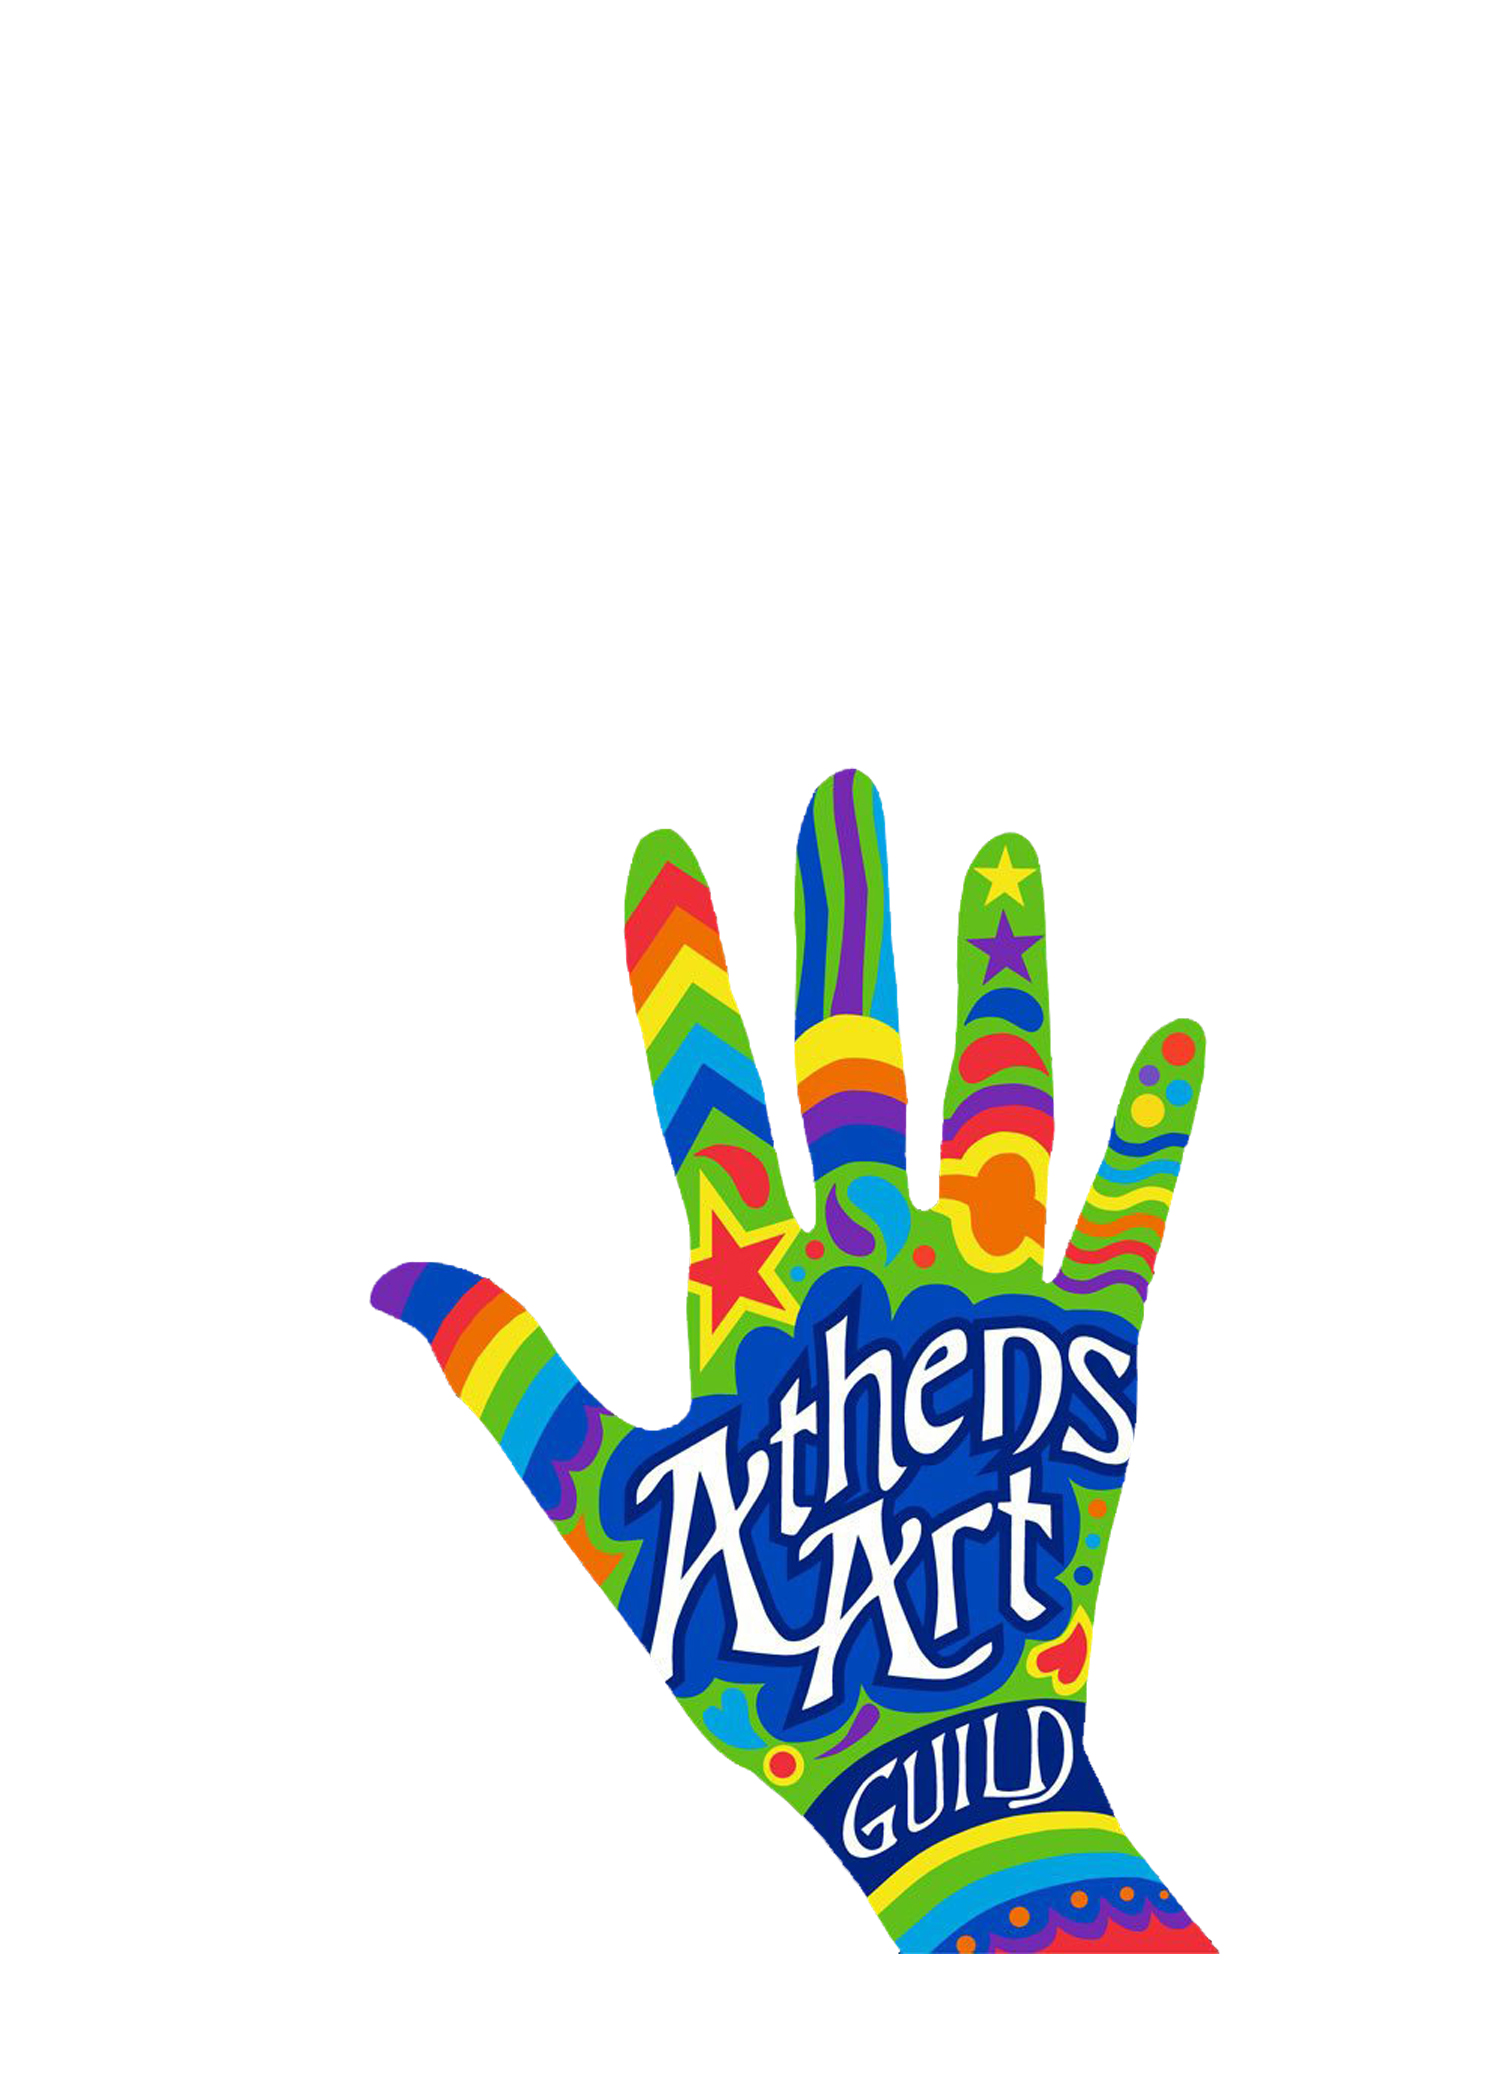 Official logo for the Athens Art Guild.